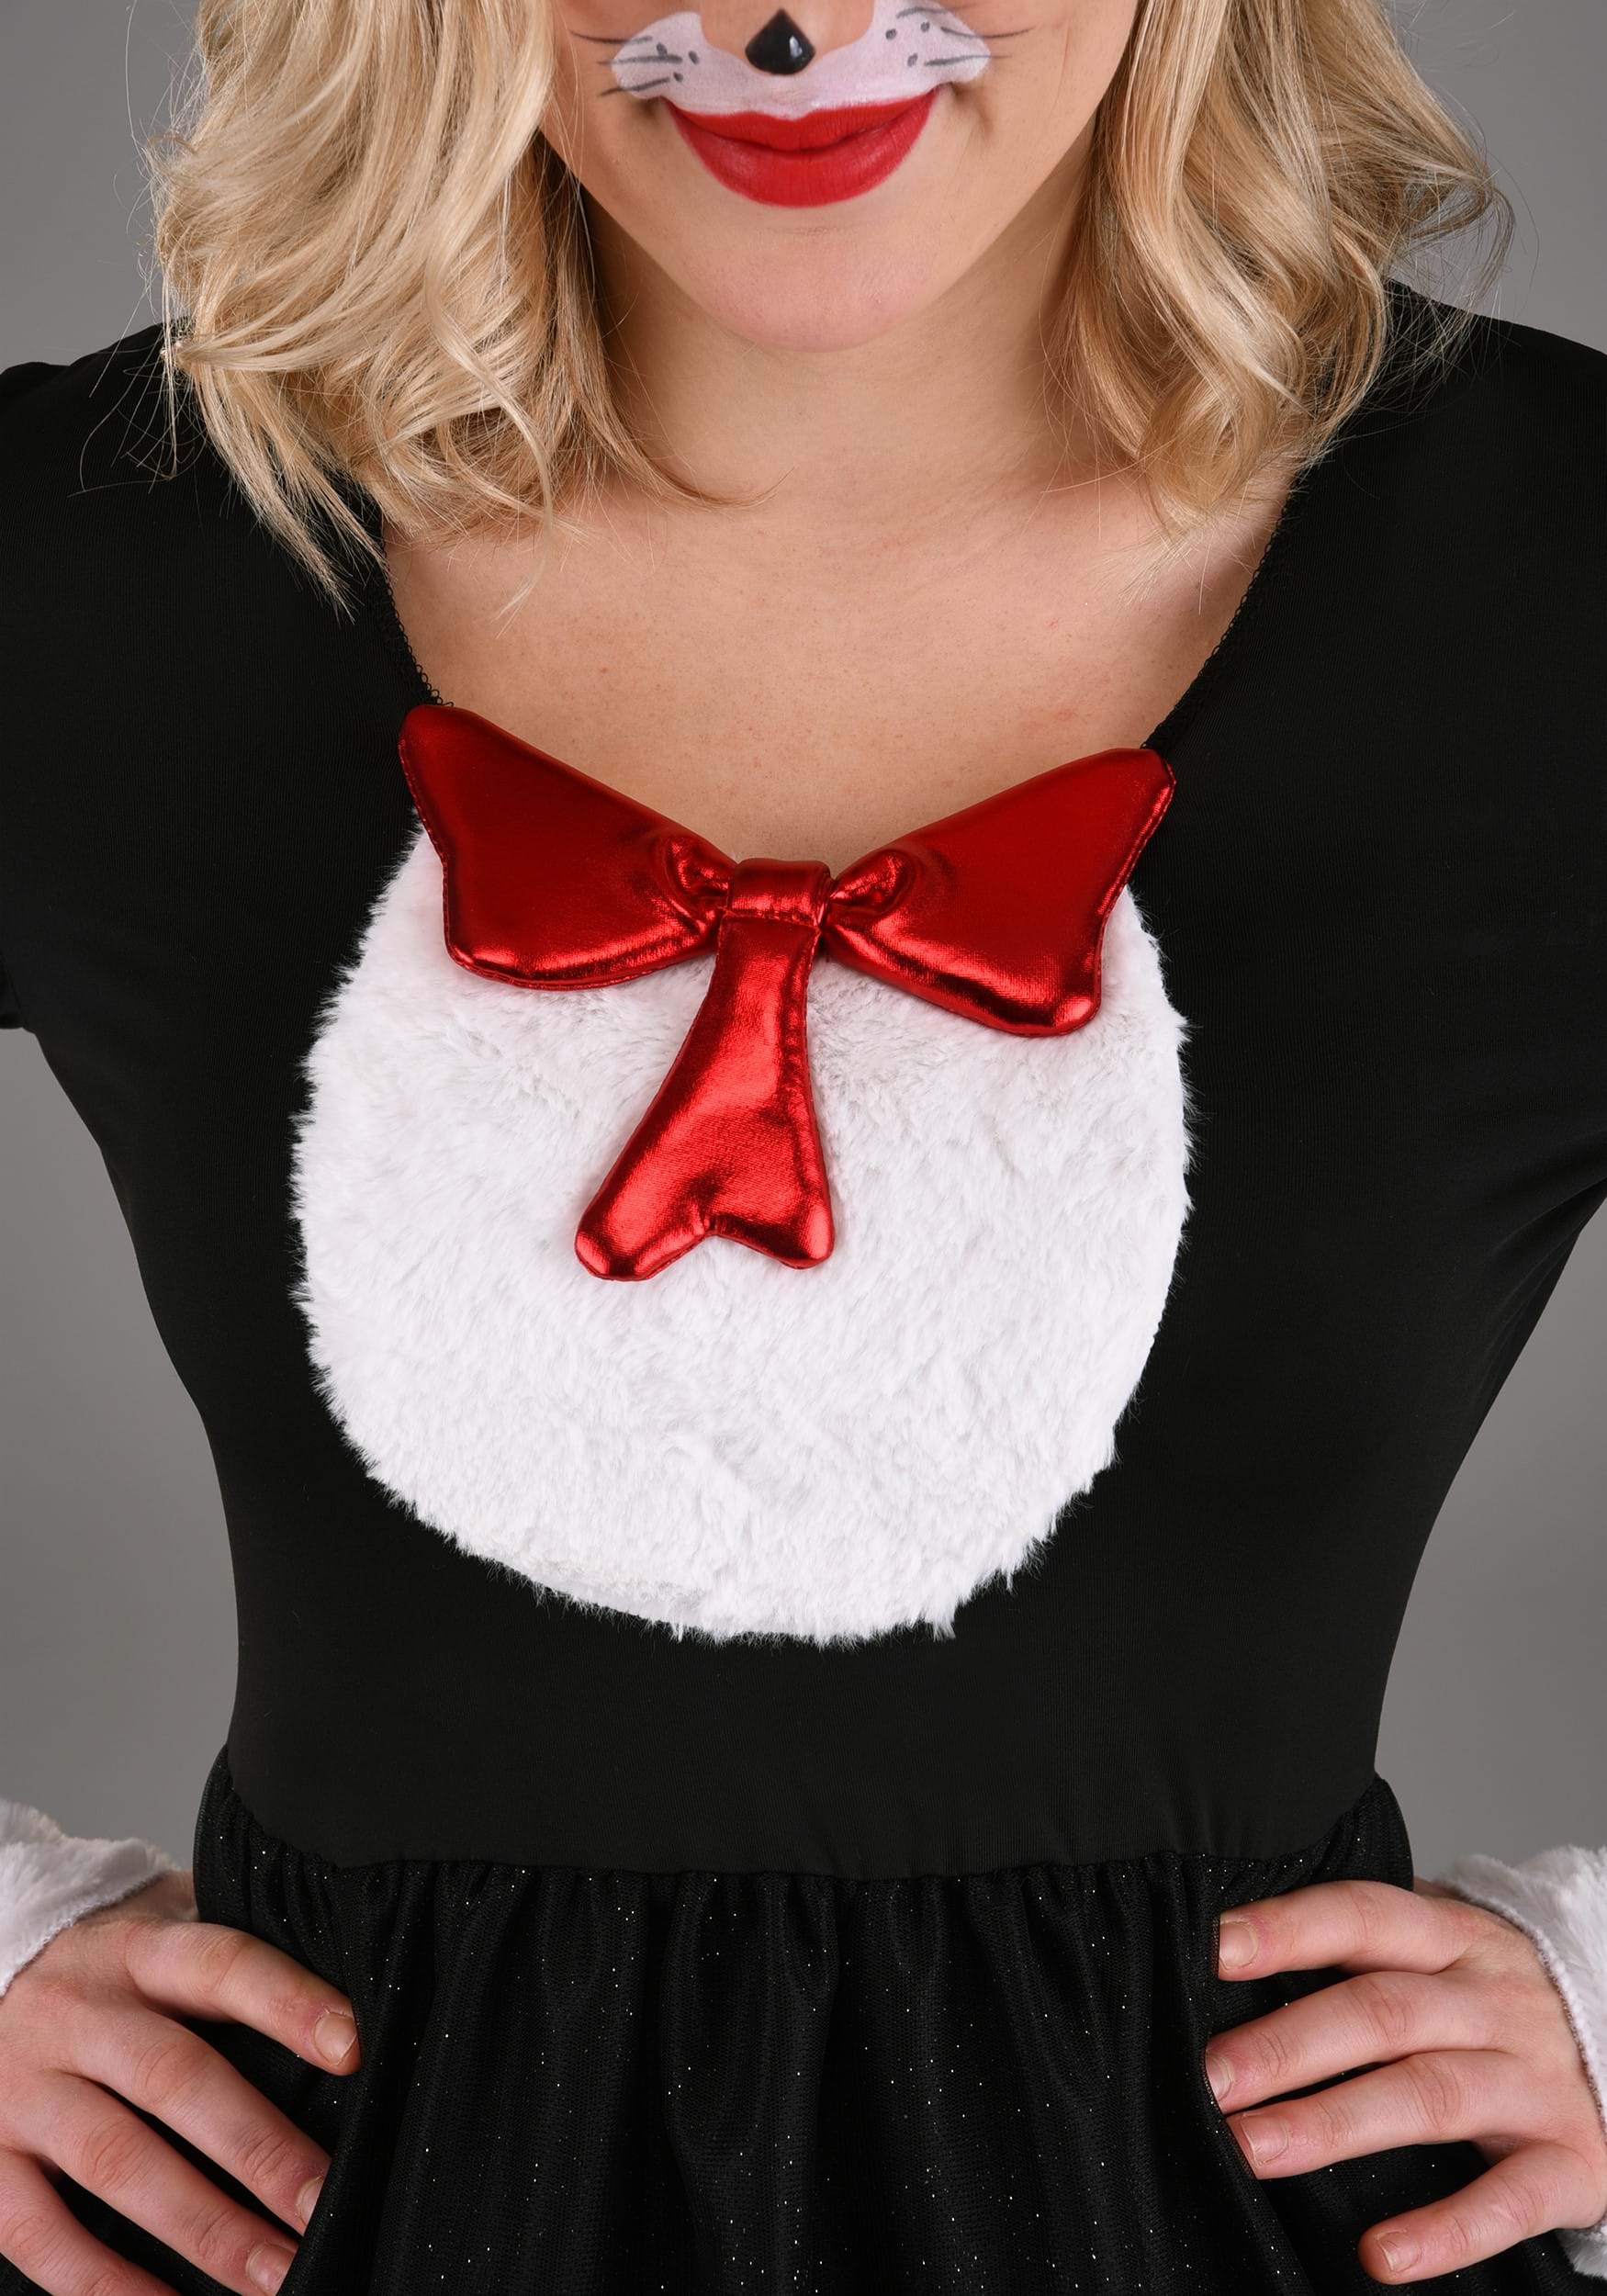 Cat In The Hat Costume , Women's Dr. Seuss Costumes